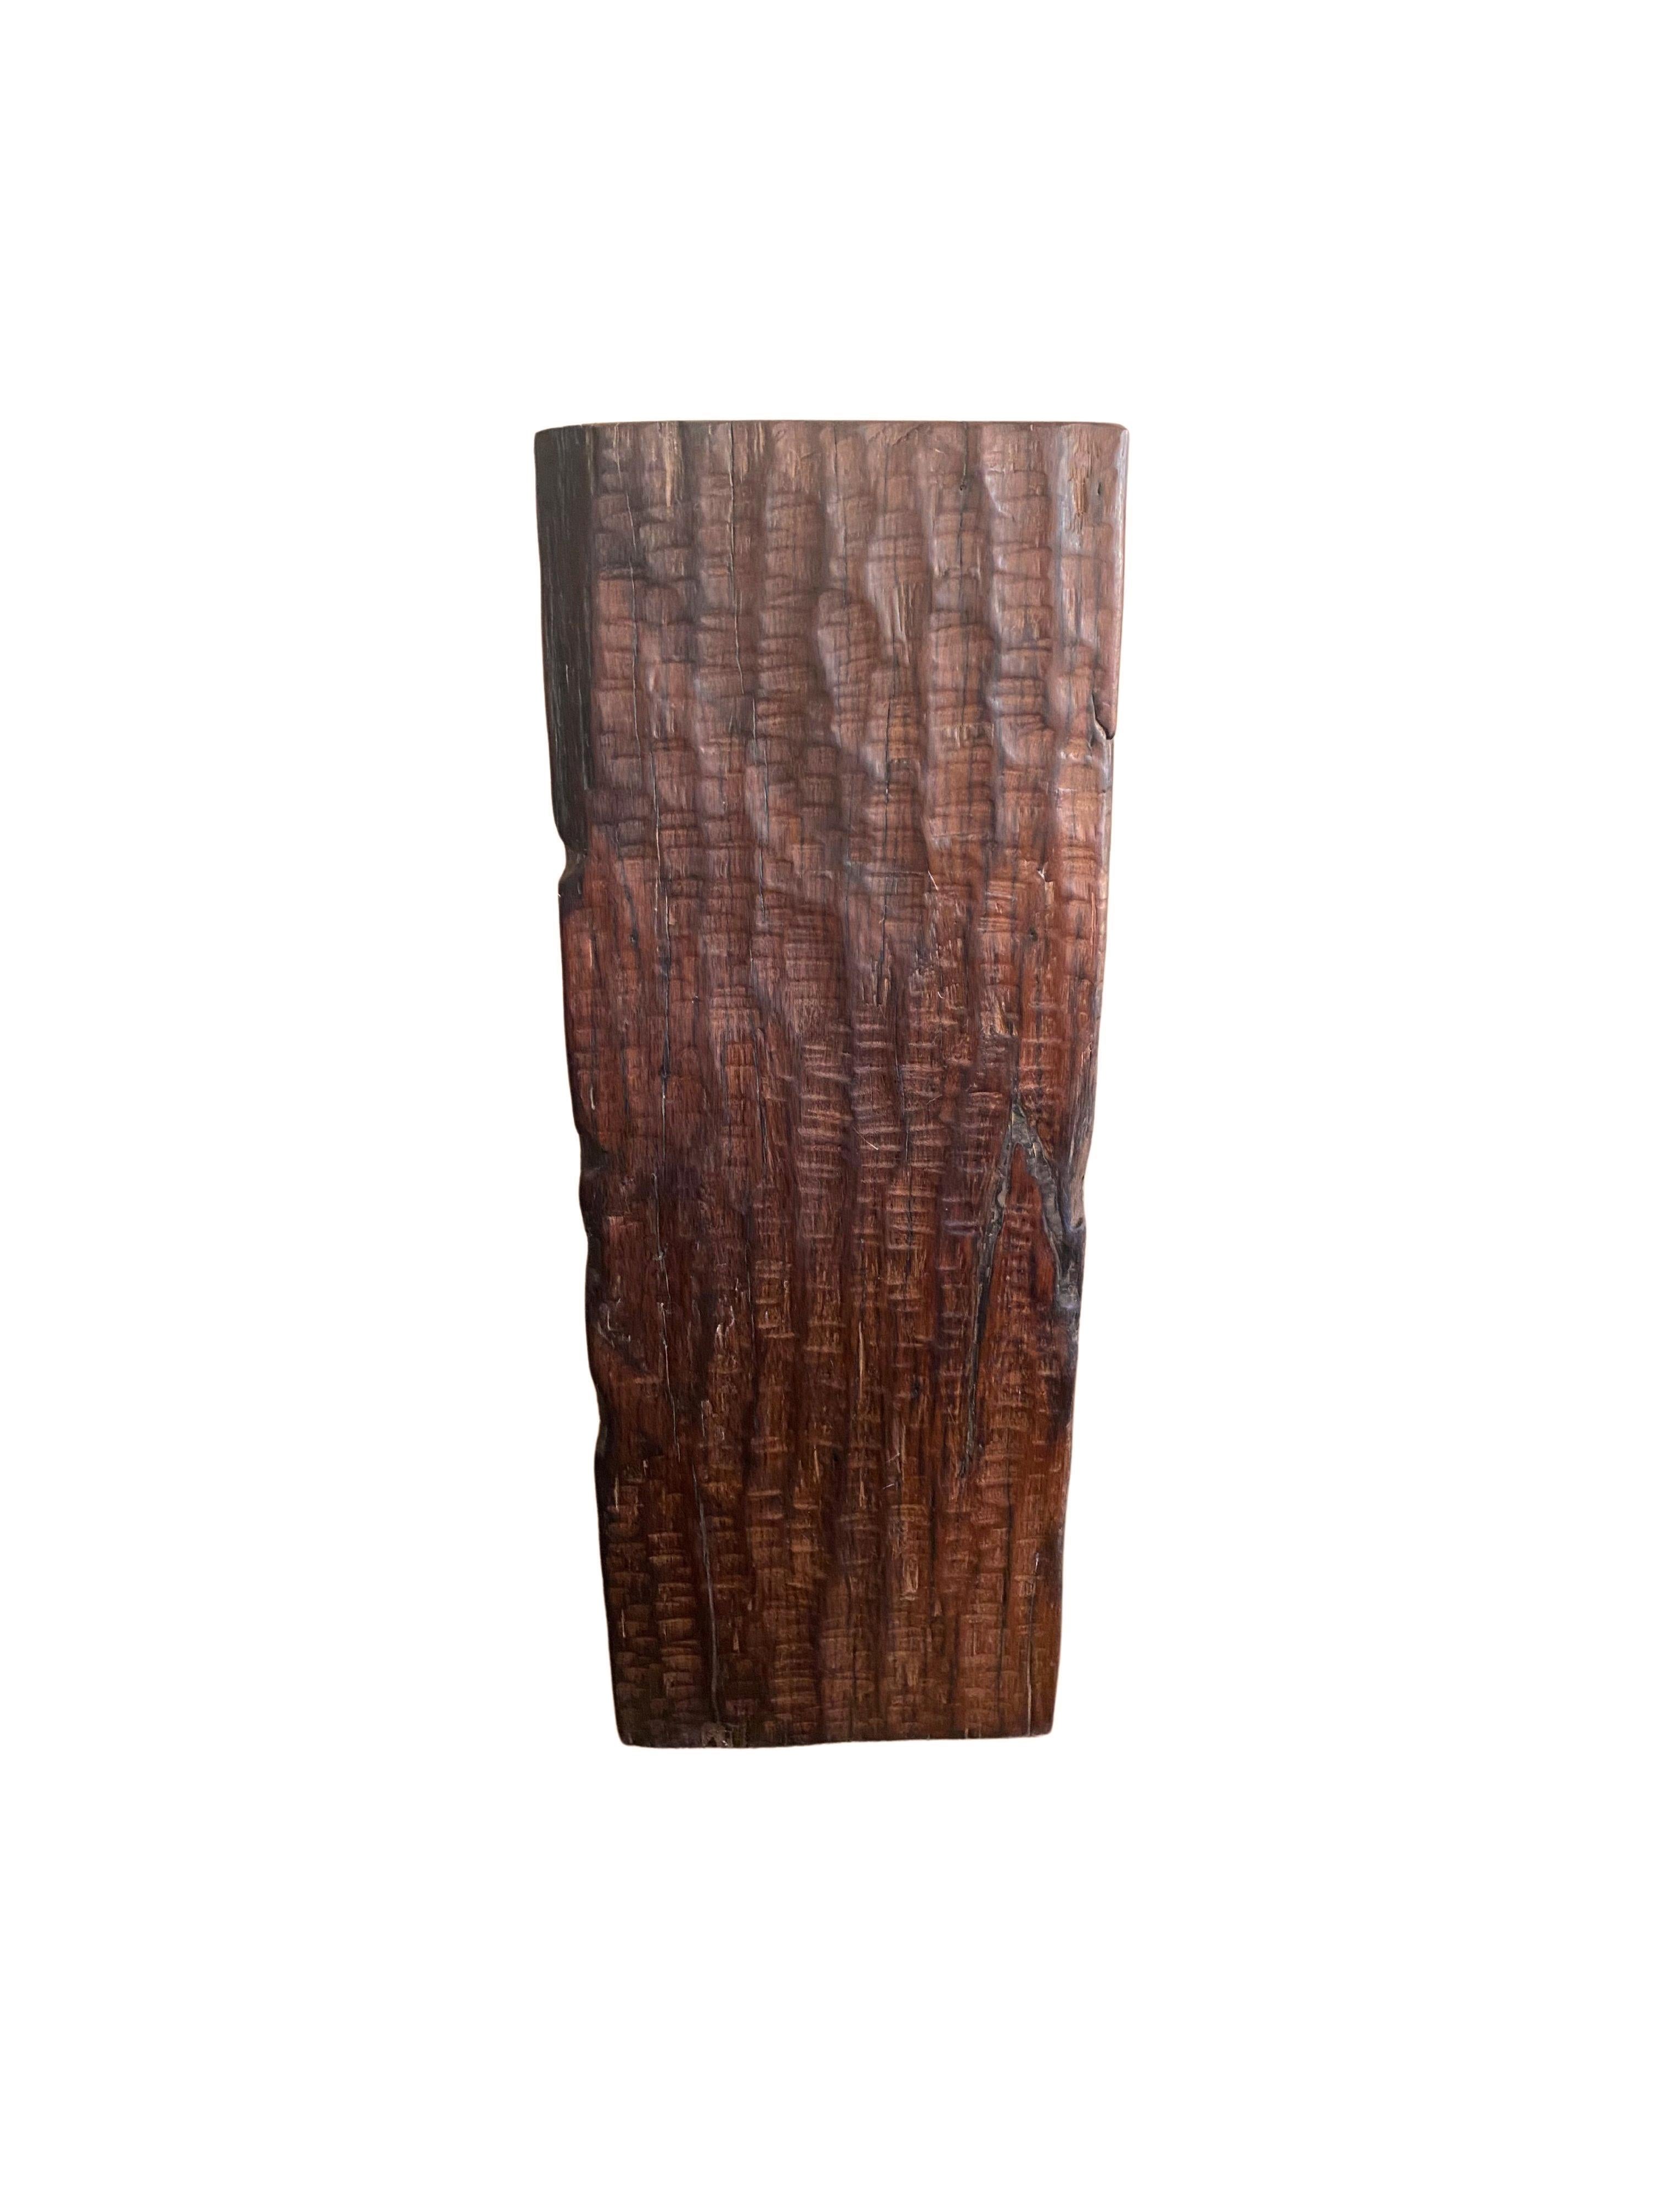 Solid Iron Wood Pedestal with Stunning Wood Texture For Sale 2